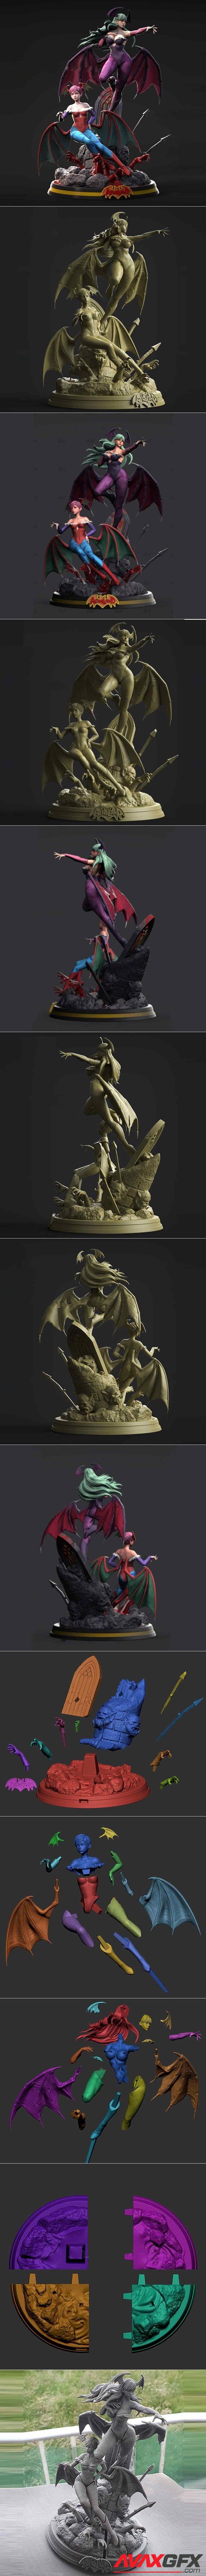 Succubus Morika and Lilith Vampire – 3D Printable STL